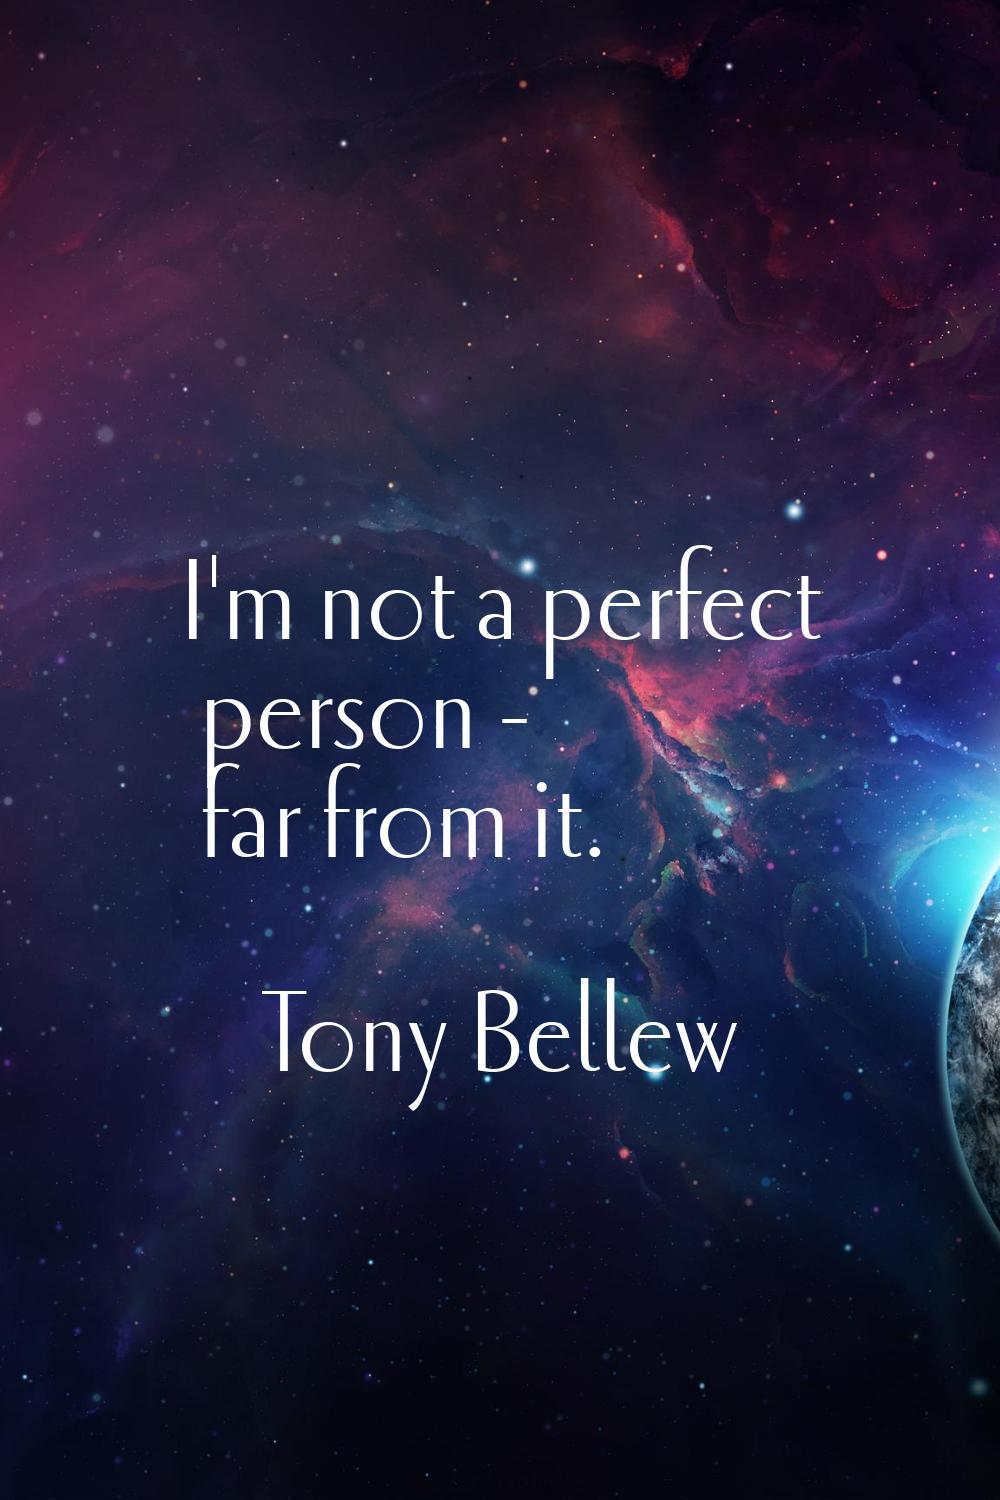 I'm not a perfect person - far from it.